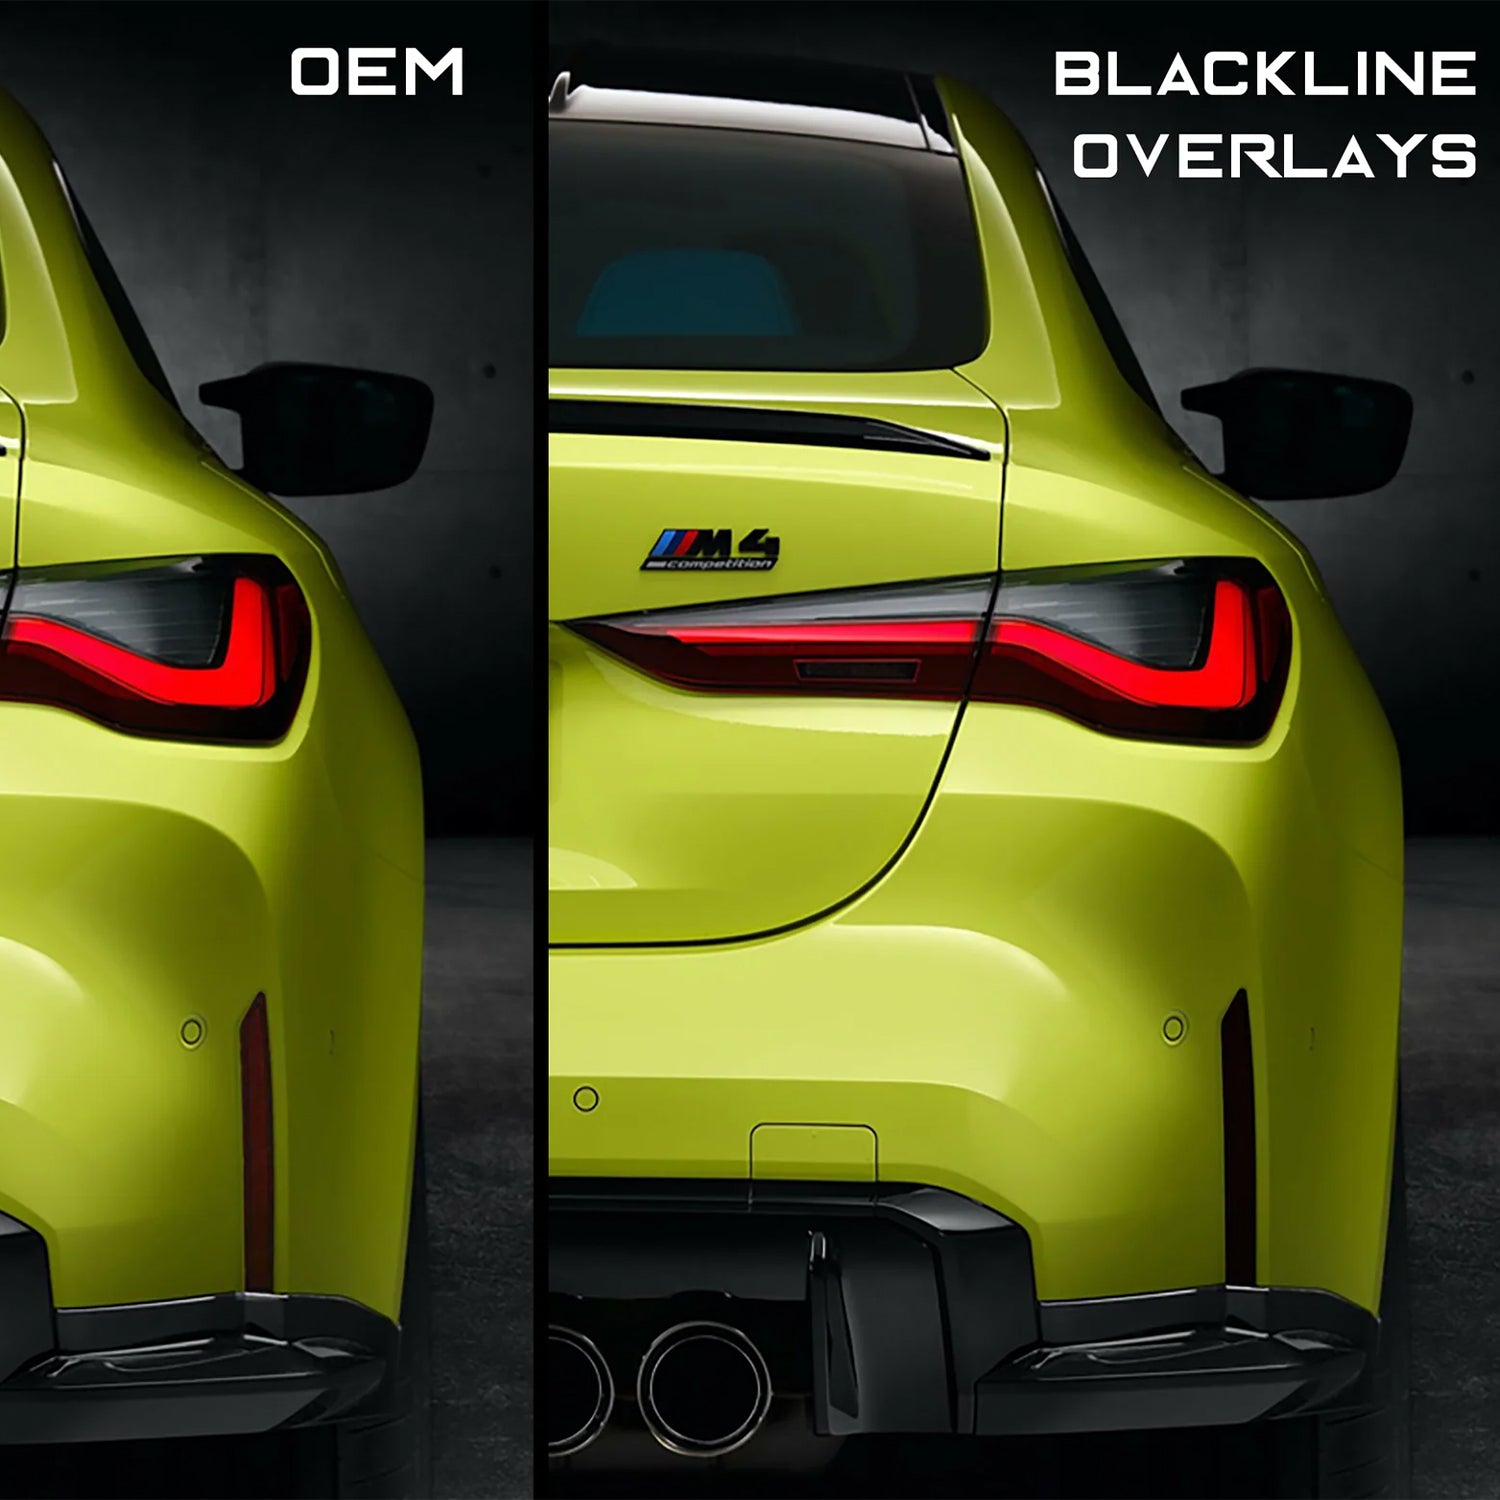 GoldenWrench Supply BMW G80 M3 G82 M4 BLACKLINE Rear Reflector Overlay Kit Before & After